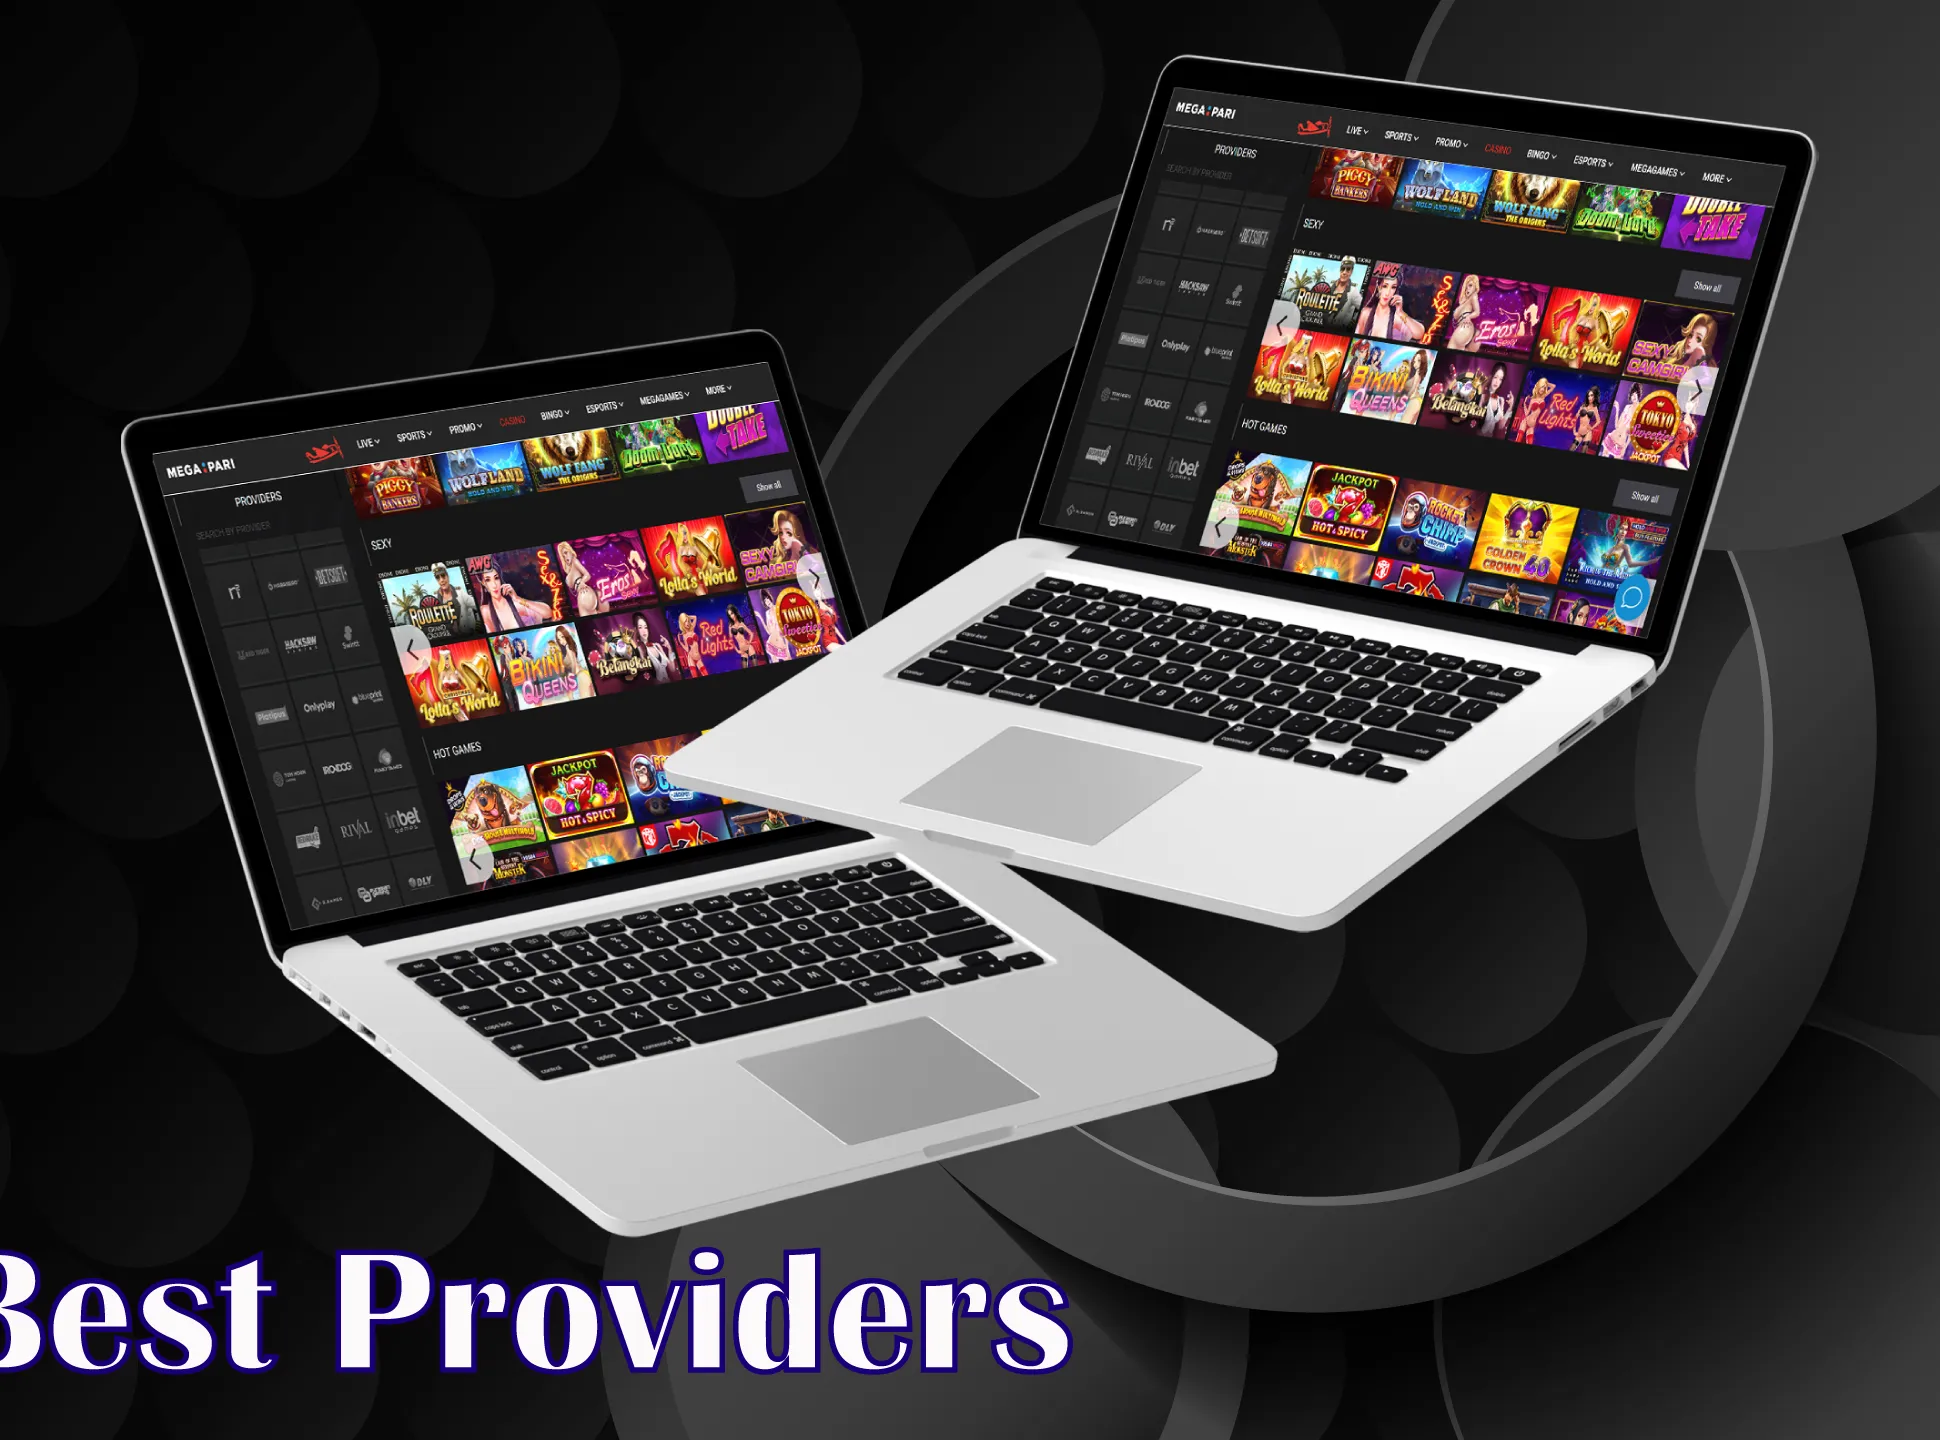 There are several features that help us rating the providers.